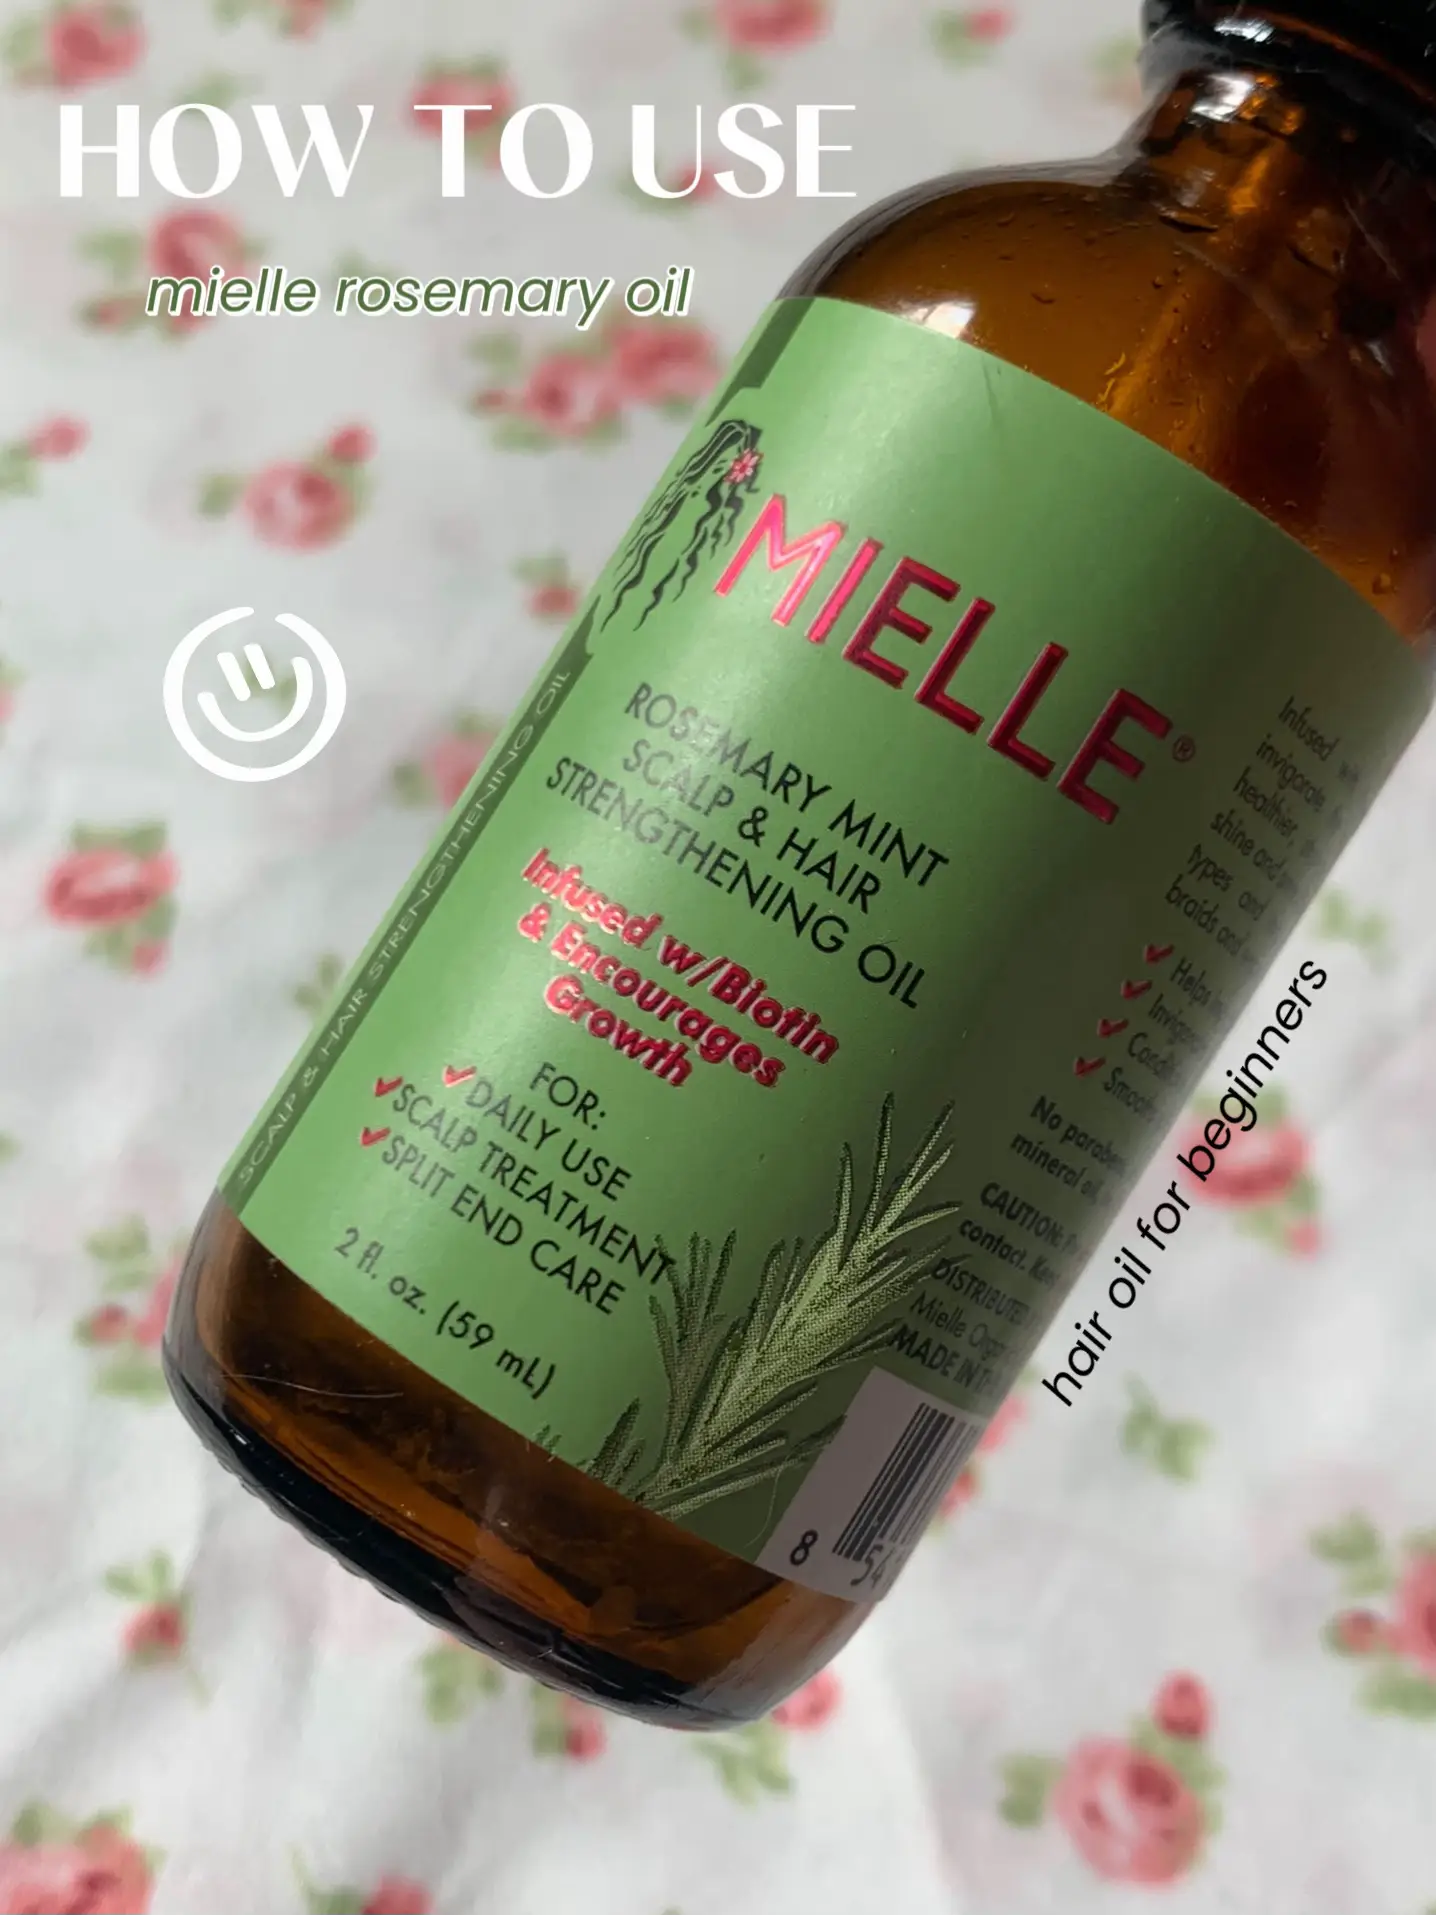 Mielle Organics - Our #Mielle Rosemary Mint Oil does everything from  supporting length retention and nourishing hair follicles to smoothing  split ends and preventing dry scalp, this organic hair oil uses natural